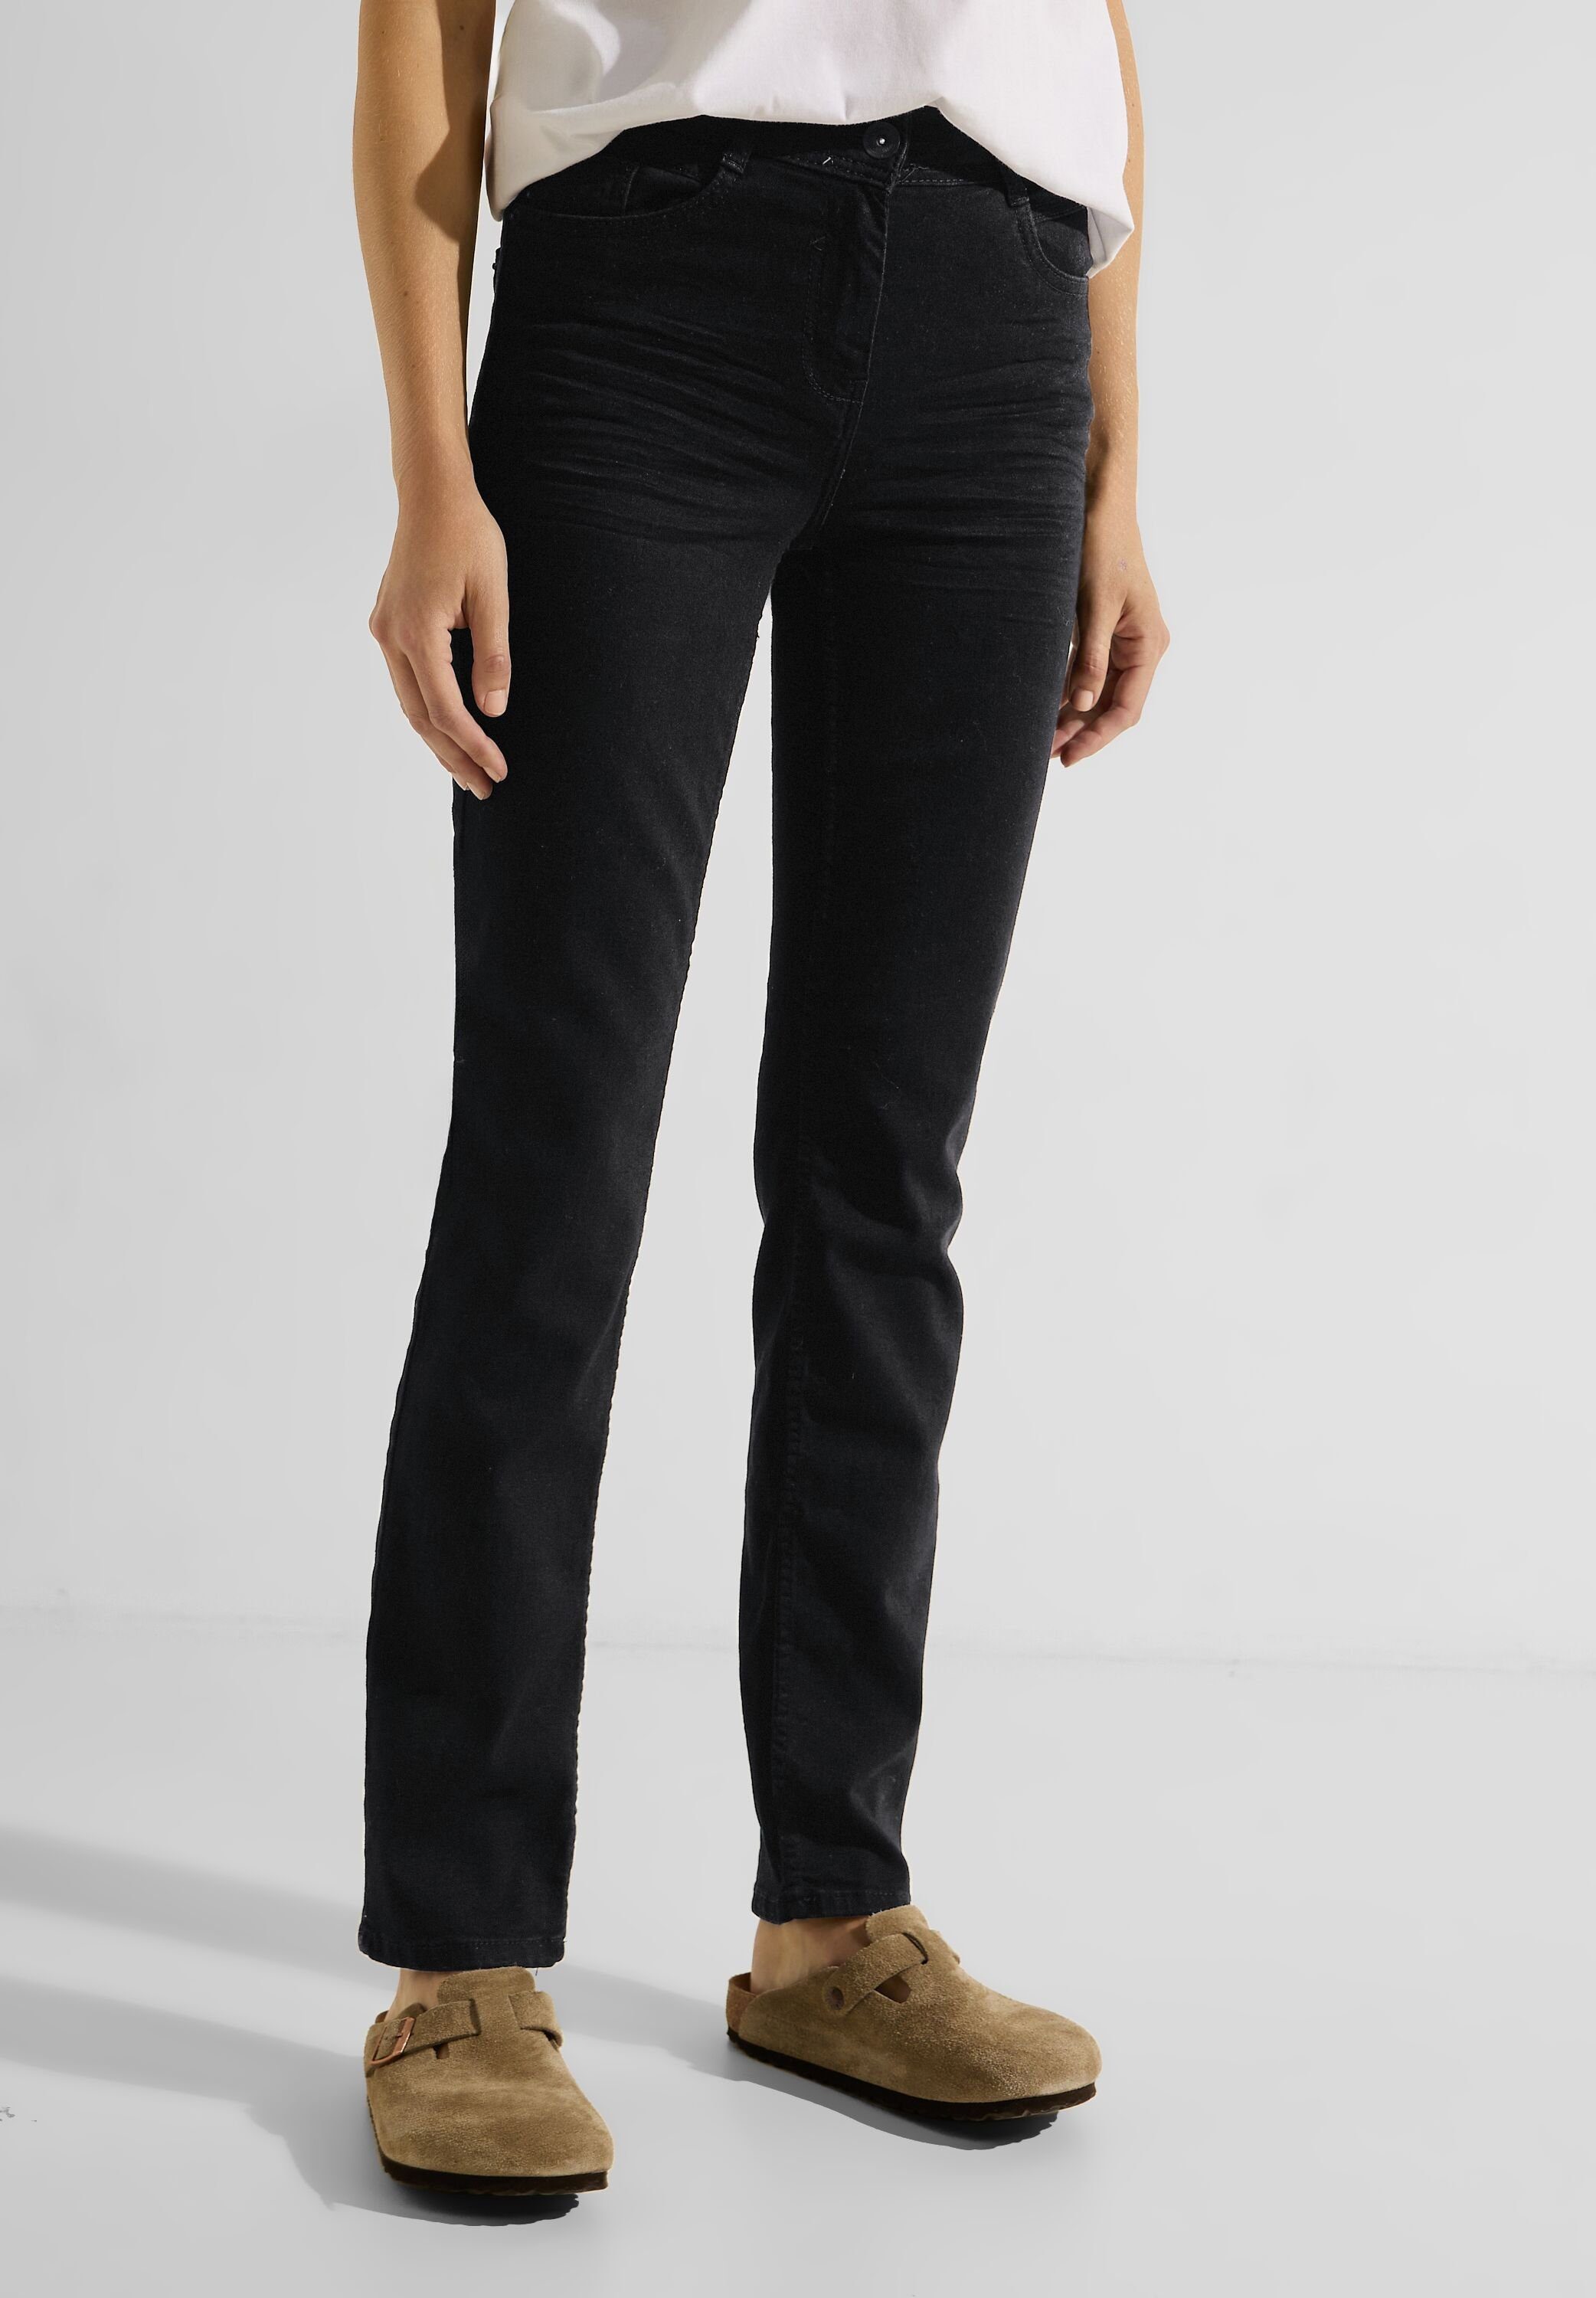 Cecil Jeans Pockets (1-tlg) Jeans Bequeme Black Cecil Straight Five Dunkle Fit in